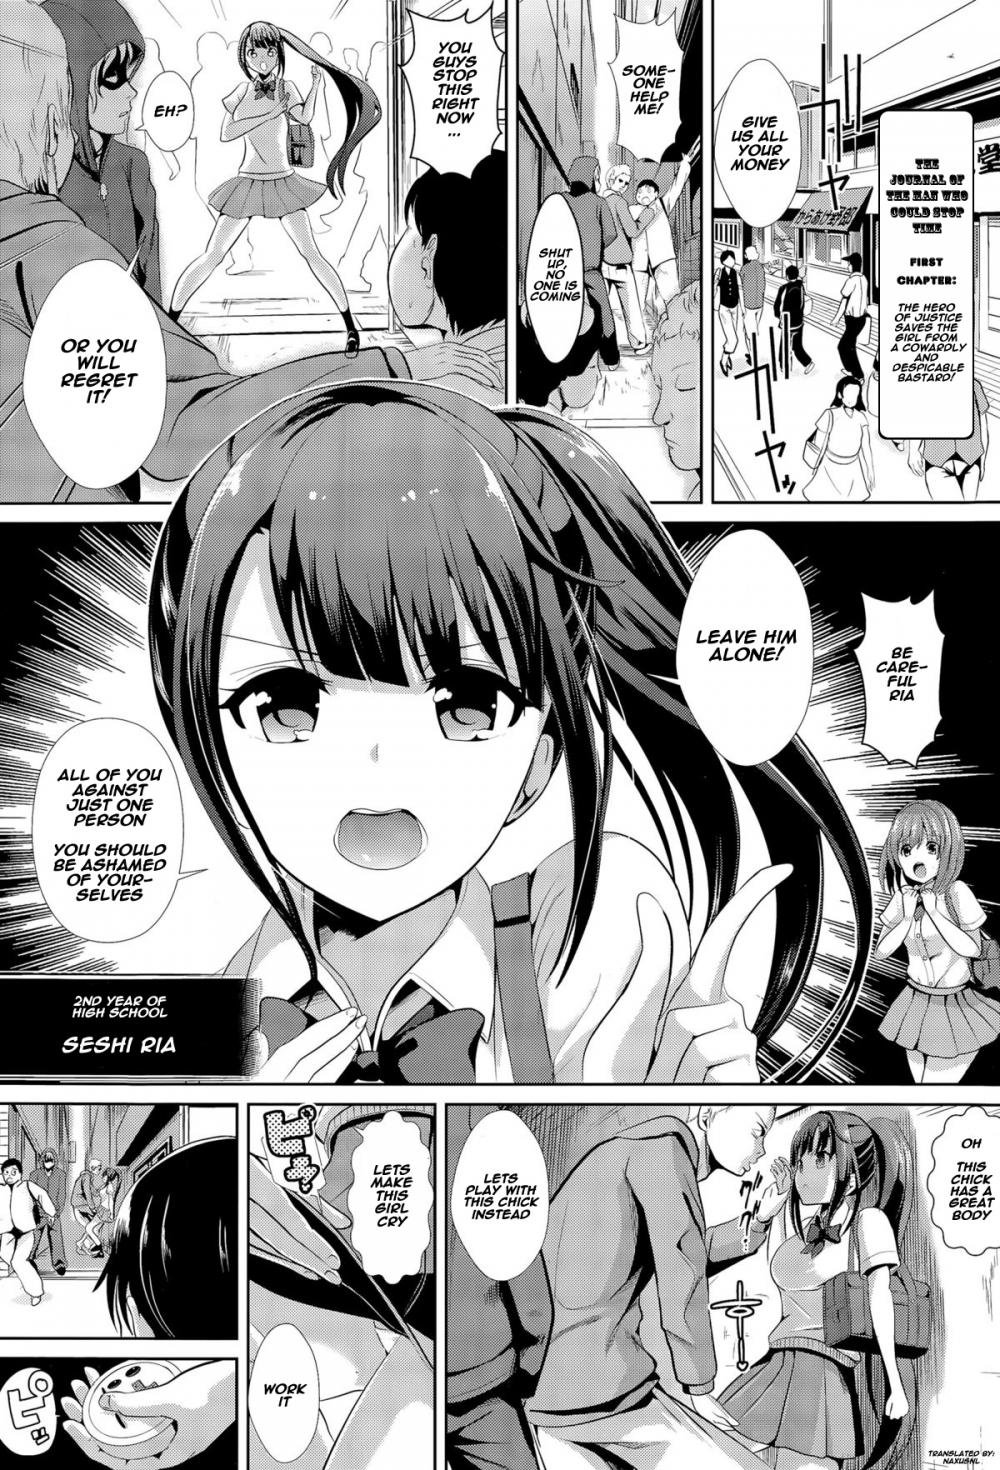 Hentai Manga Comic-The journal of the man who could stop time-Read-1